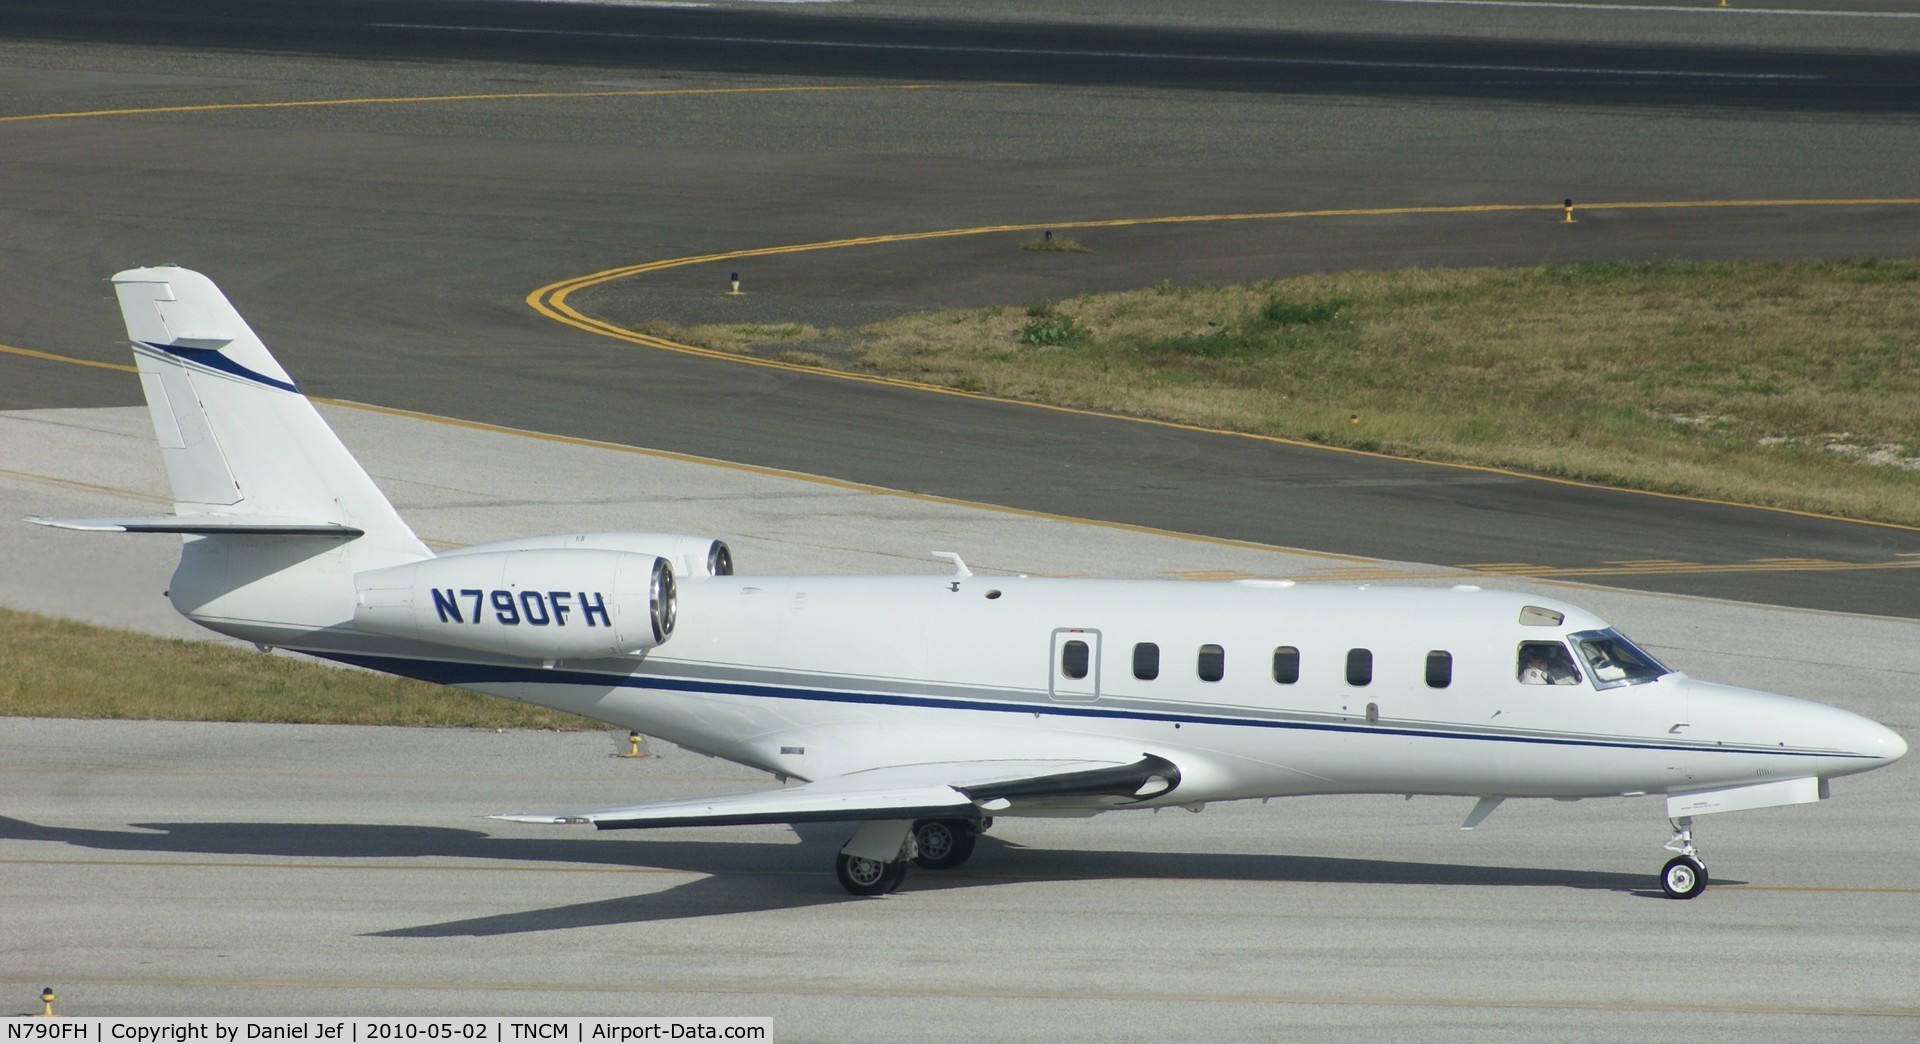 N790FH, 1991 Israel Aircraft Industries IAI-1125 Westwind Astra C/N 056, N790FH taxing the the active for take off